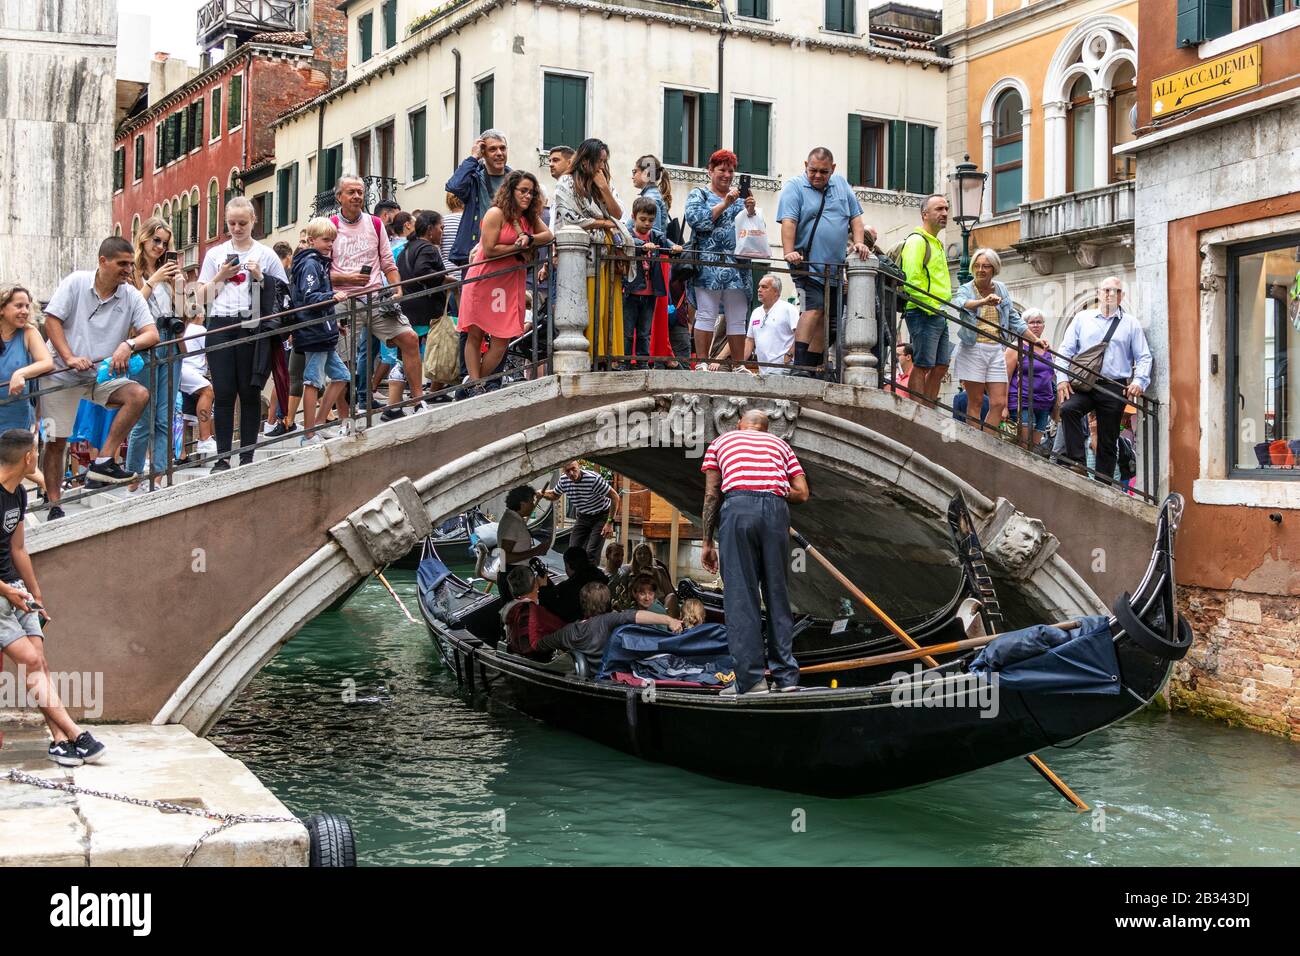 Mass tourism. Crowded bridge over canal, as many tourists watch and photograph the gondola's going by. Venice, Italy Stock Photo